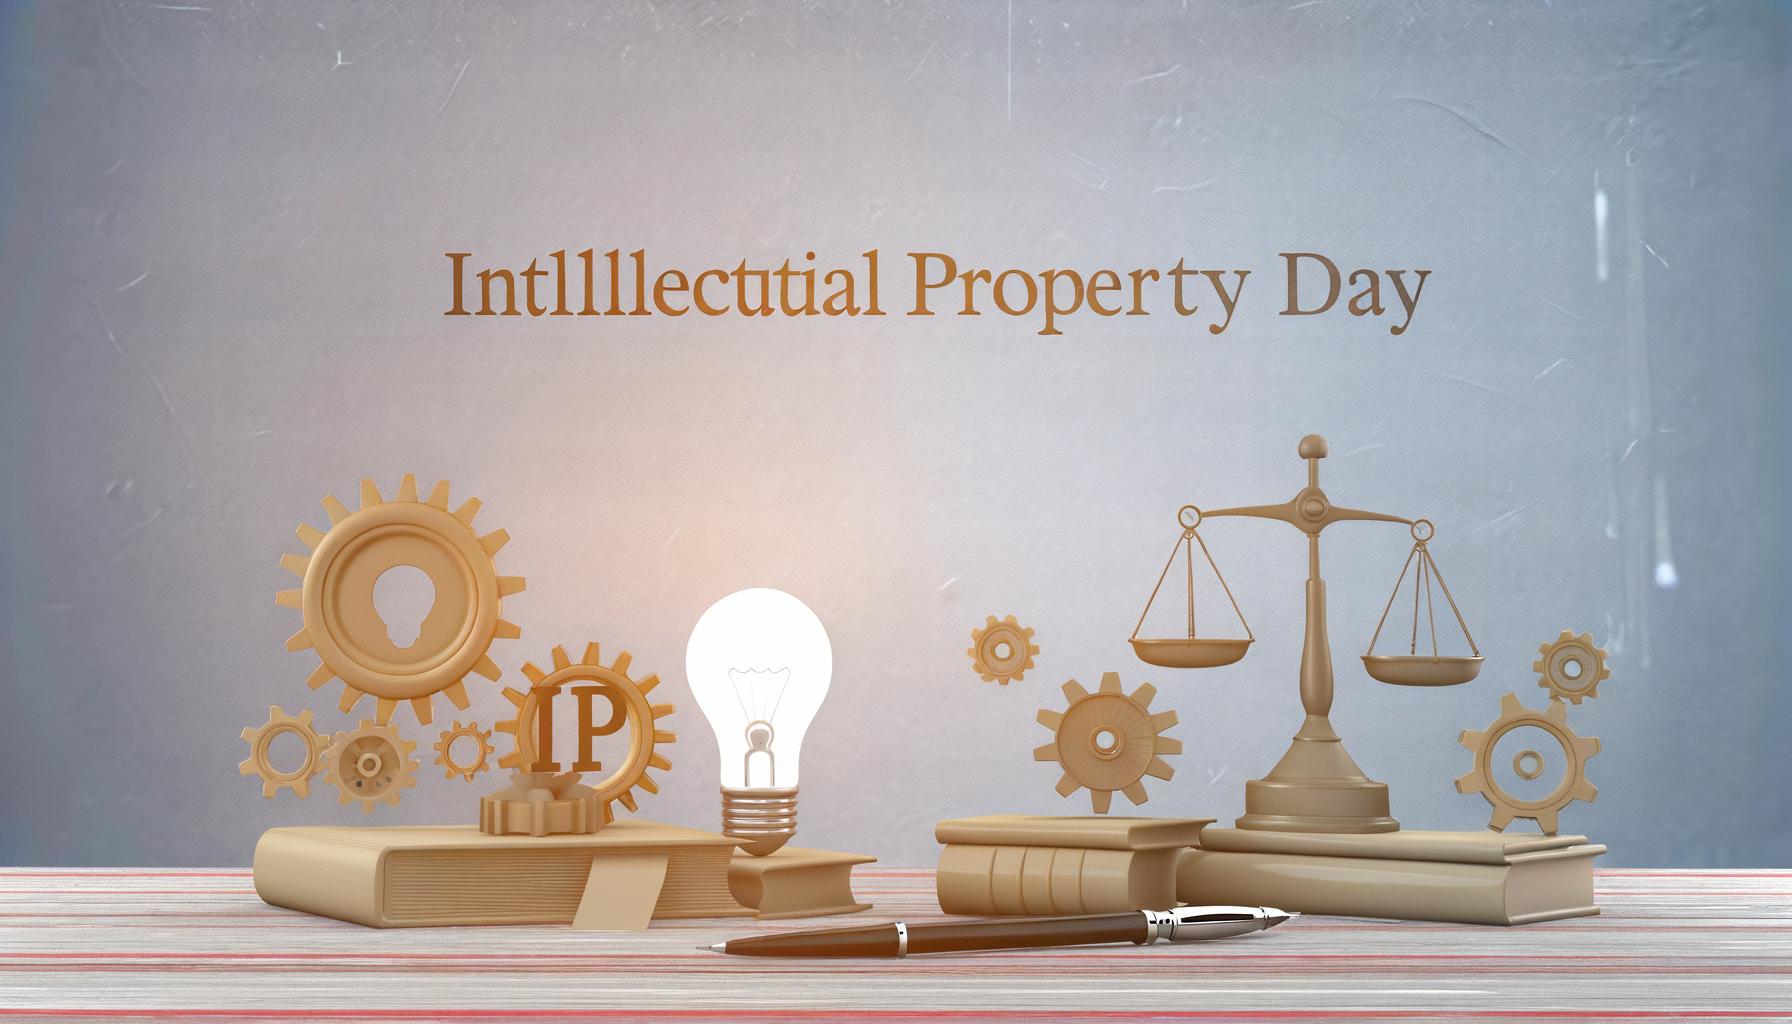 Global events on World IP Day emphasize the importance of robust intellectual property frameworks.